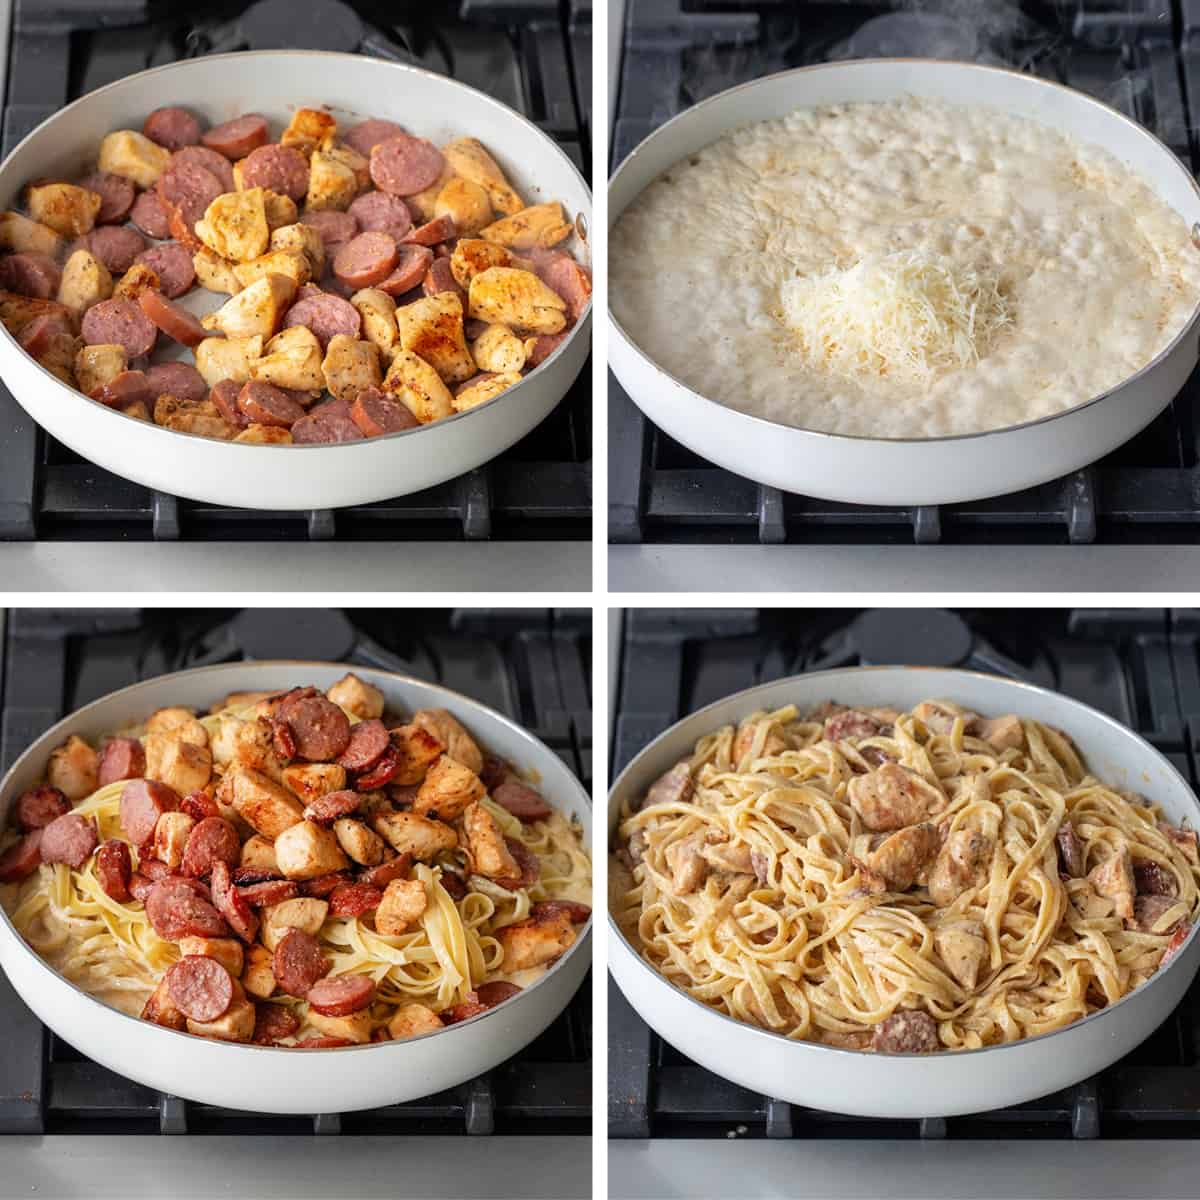 Steps for Making Cajun Chicken and Sausage Alfredo in a White Skillet on a Gas Stove.